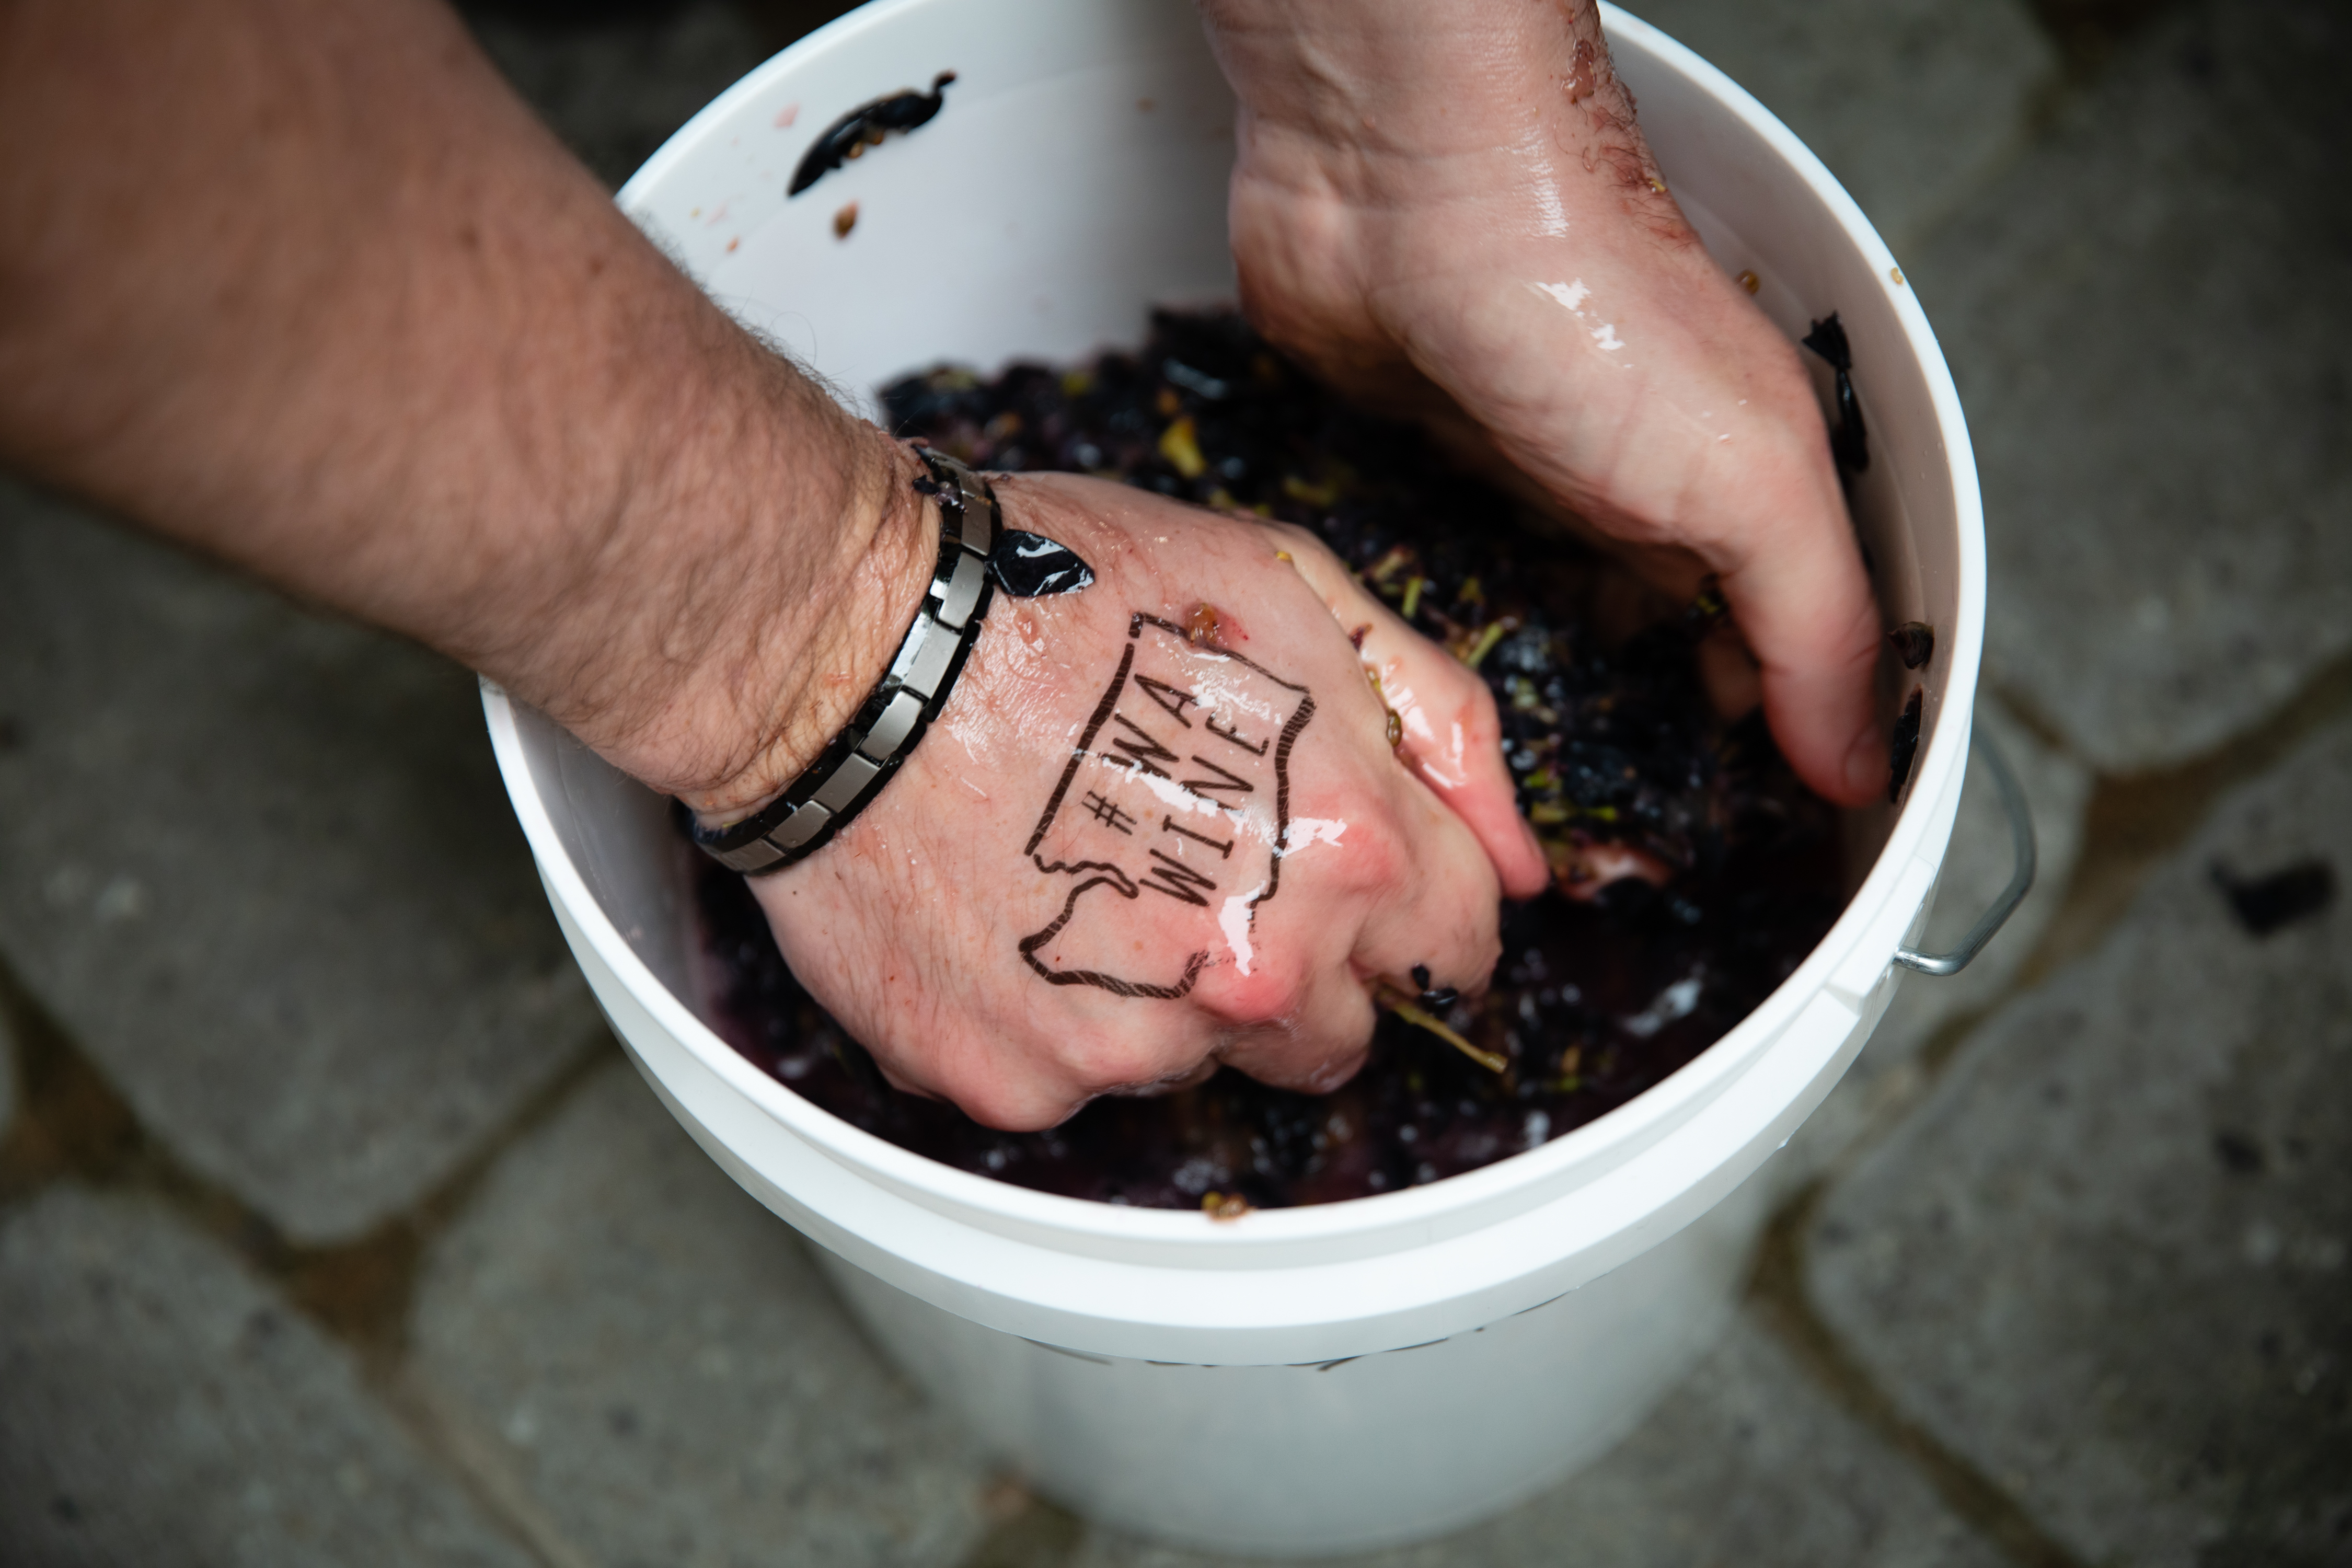 Two hands in a white bucket squeezing grapes.